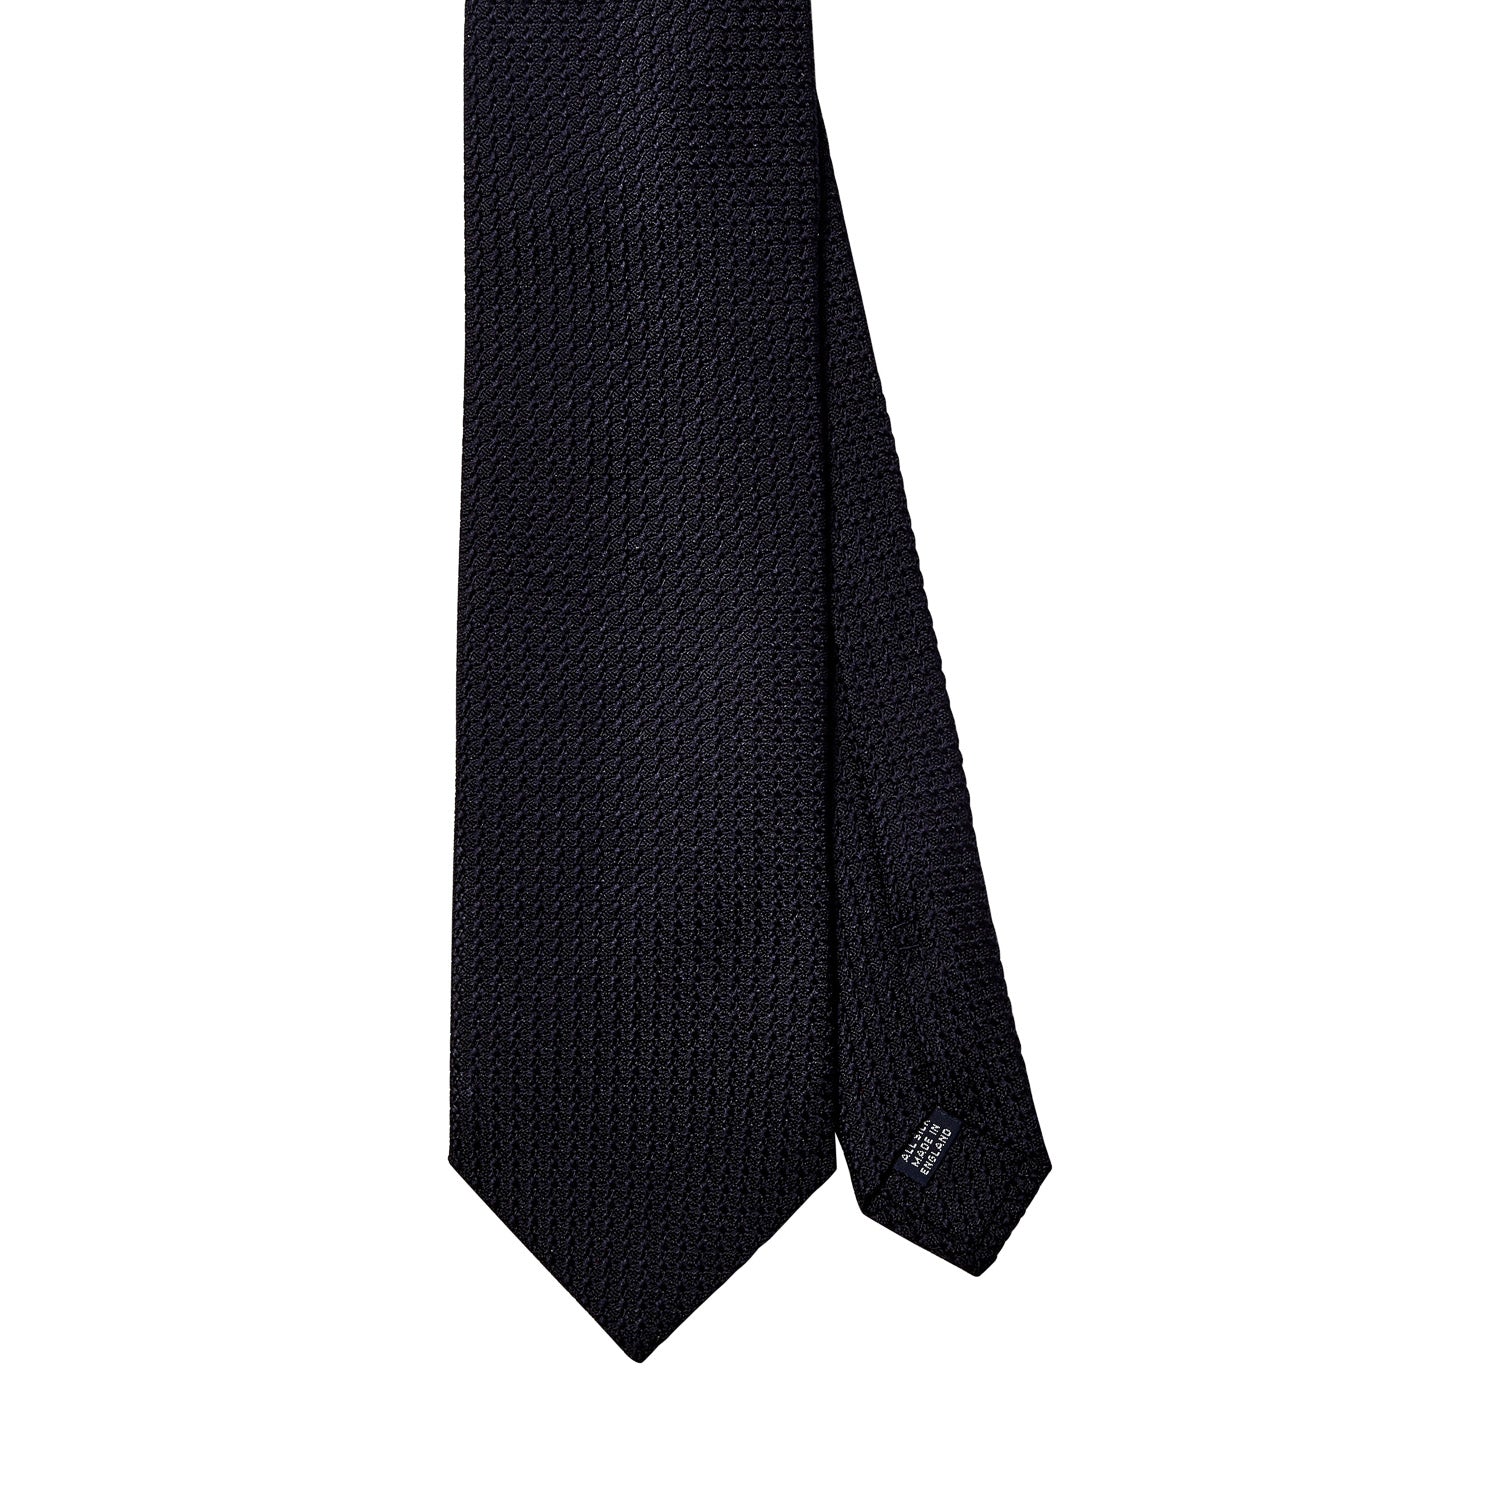 A quality Sovereign Grade Grenadine Grossa Midnight Blue Tie on a white background, available at KirbyAllison.com.